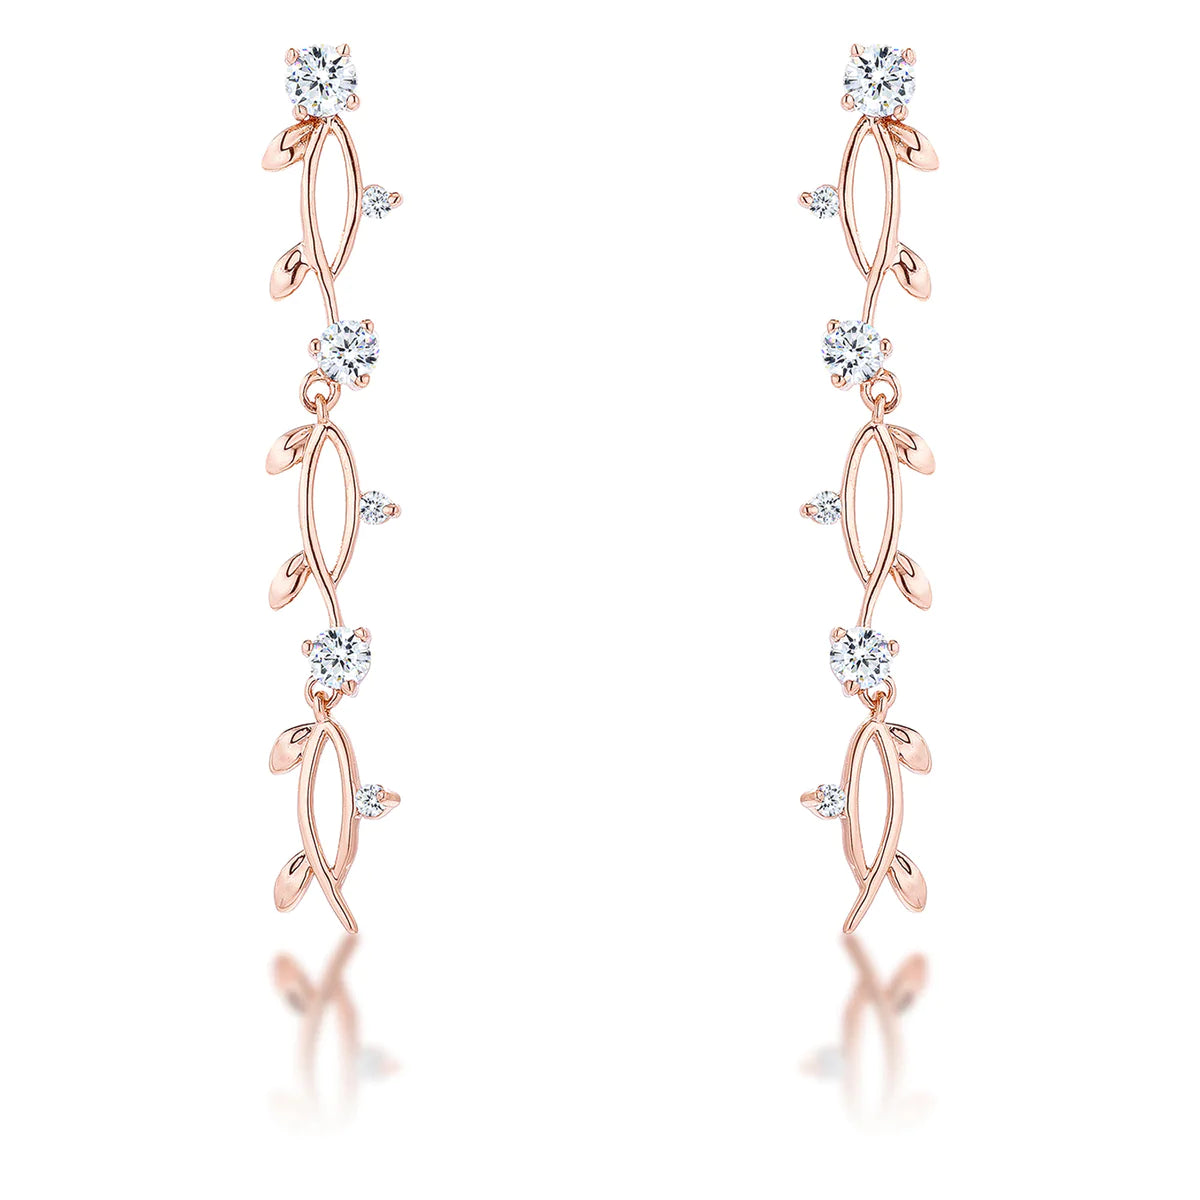 USA IMPORT 1.1Ct Vine Design Rose Gold Plated Earrings LS E01889A-C01